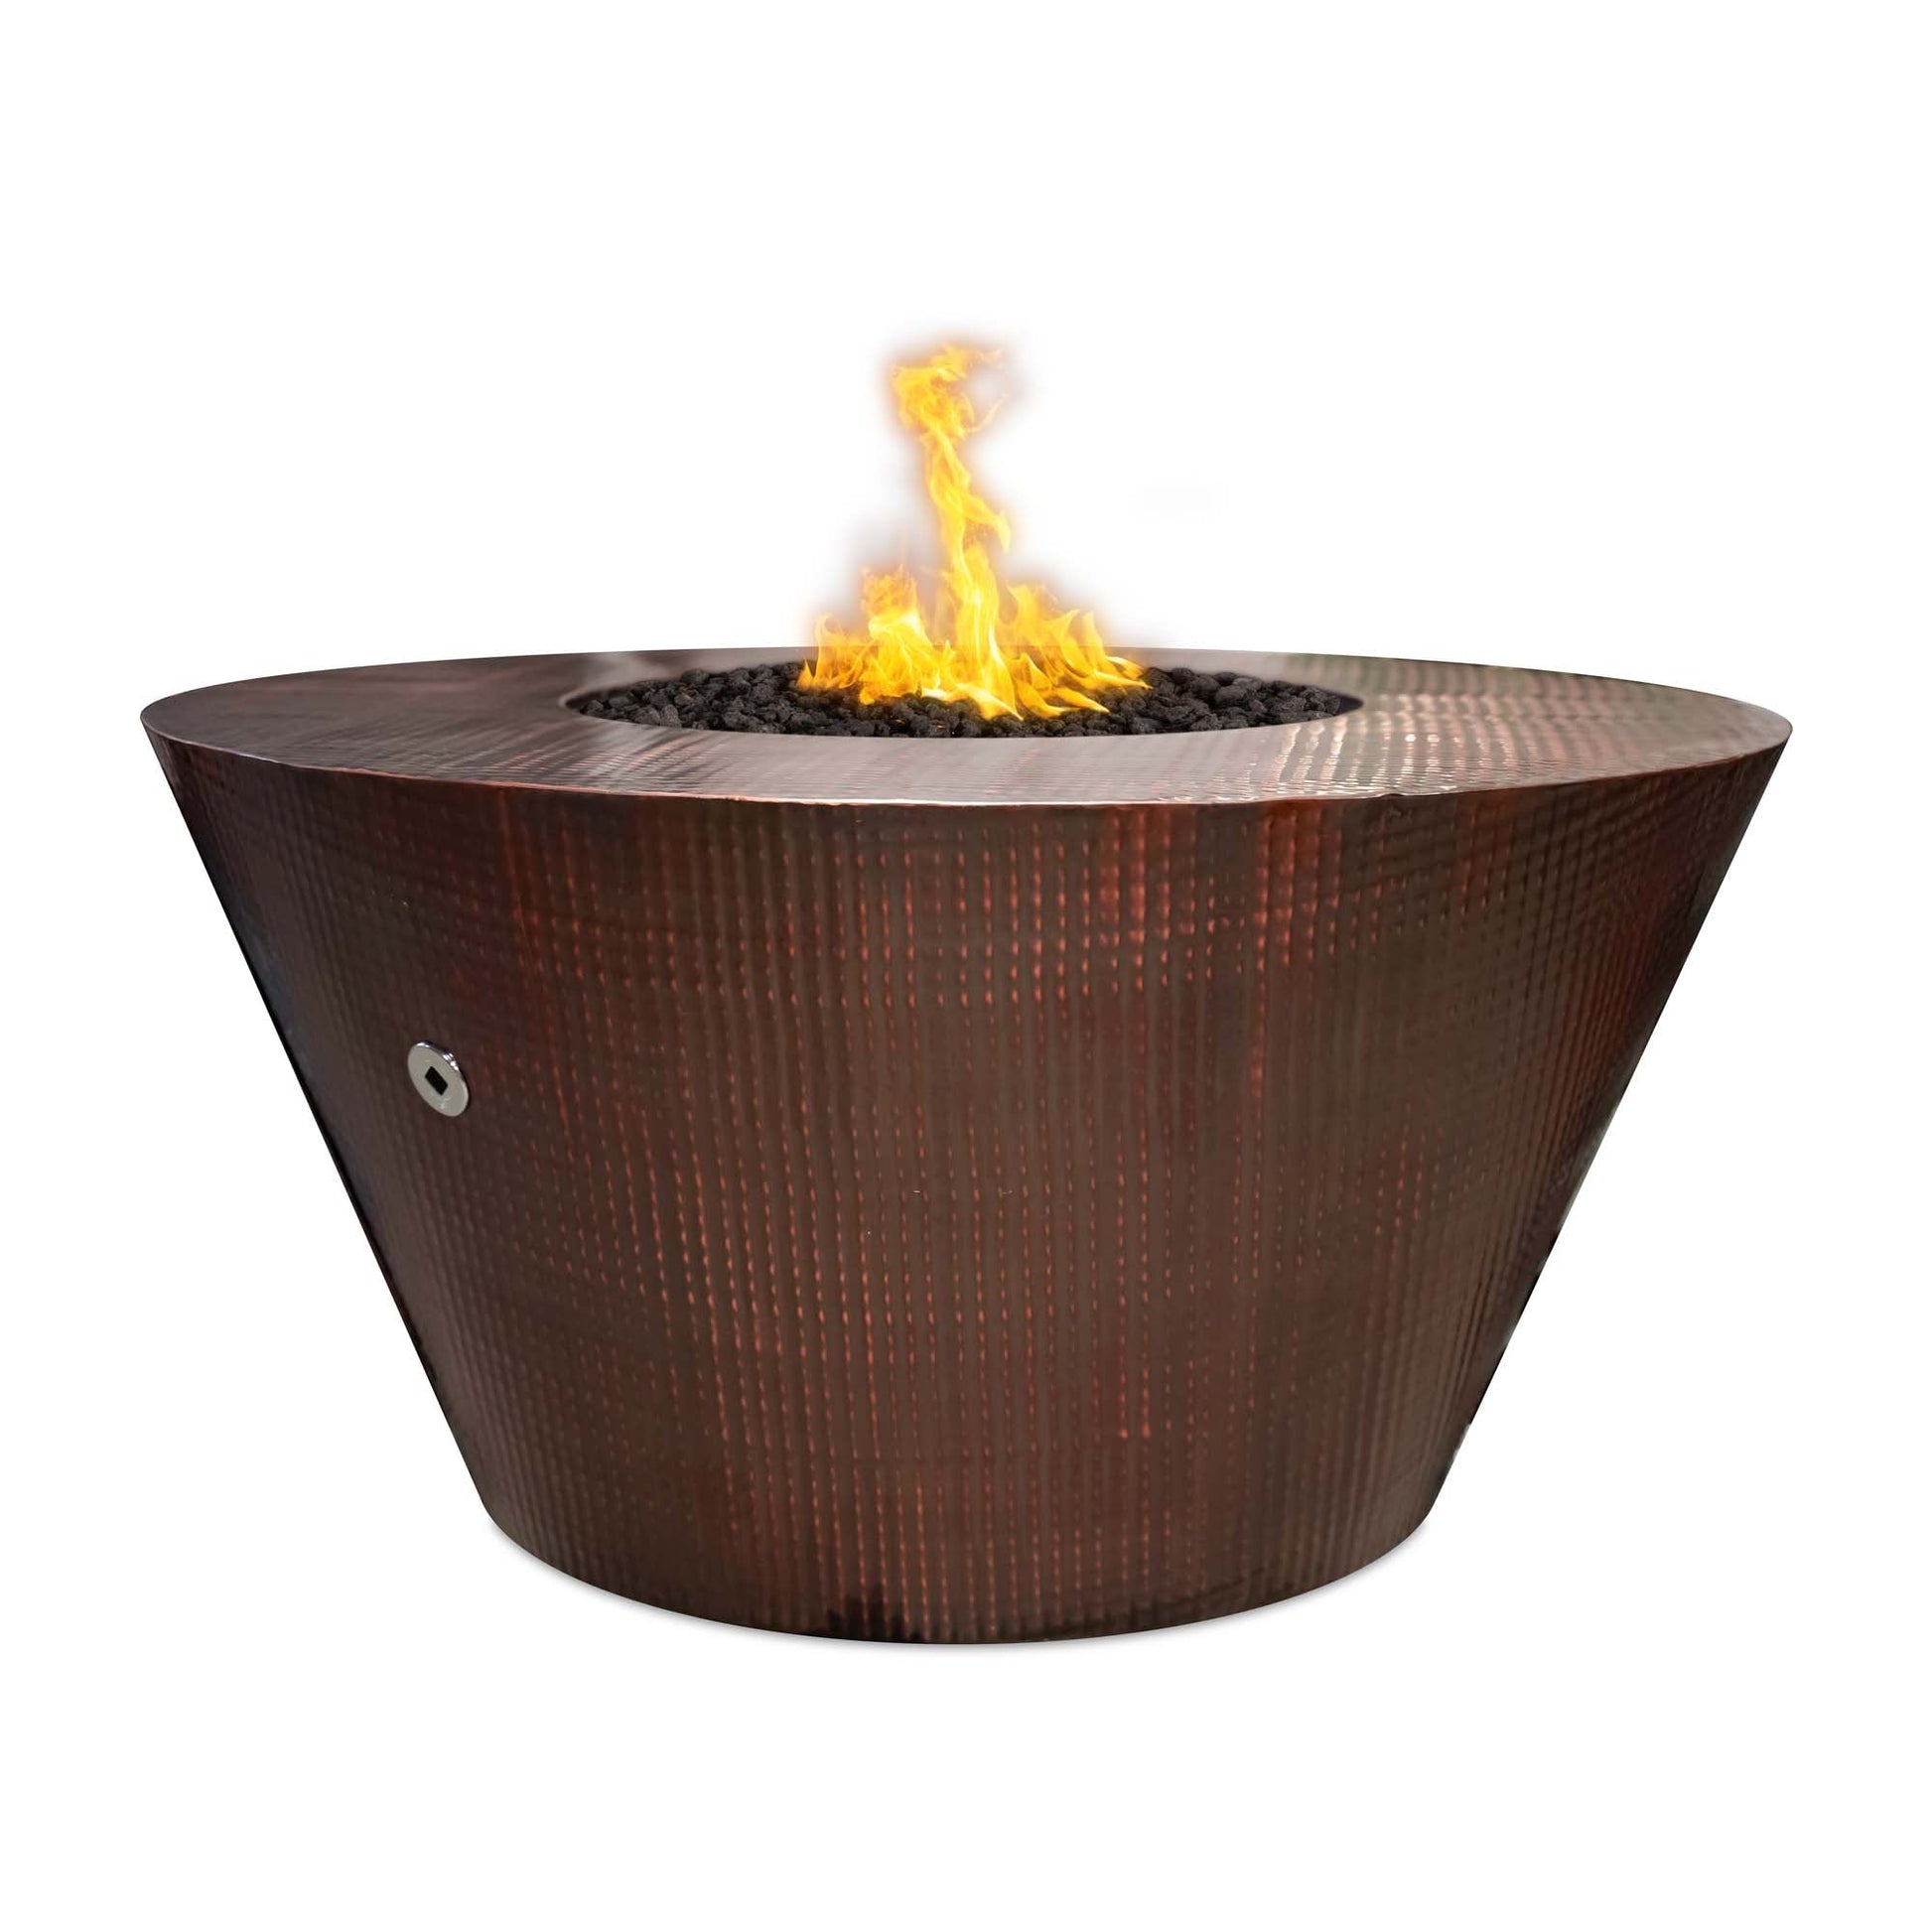 The Outdoor Plus Round Martillo 48" Corten Steel Liquid Propane Fire Pit with 110V Electronic Ignition